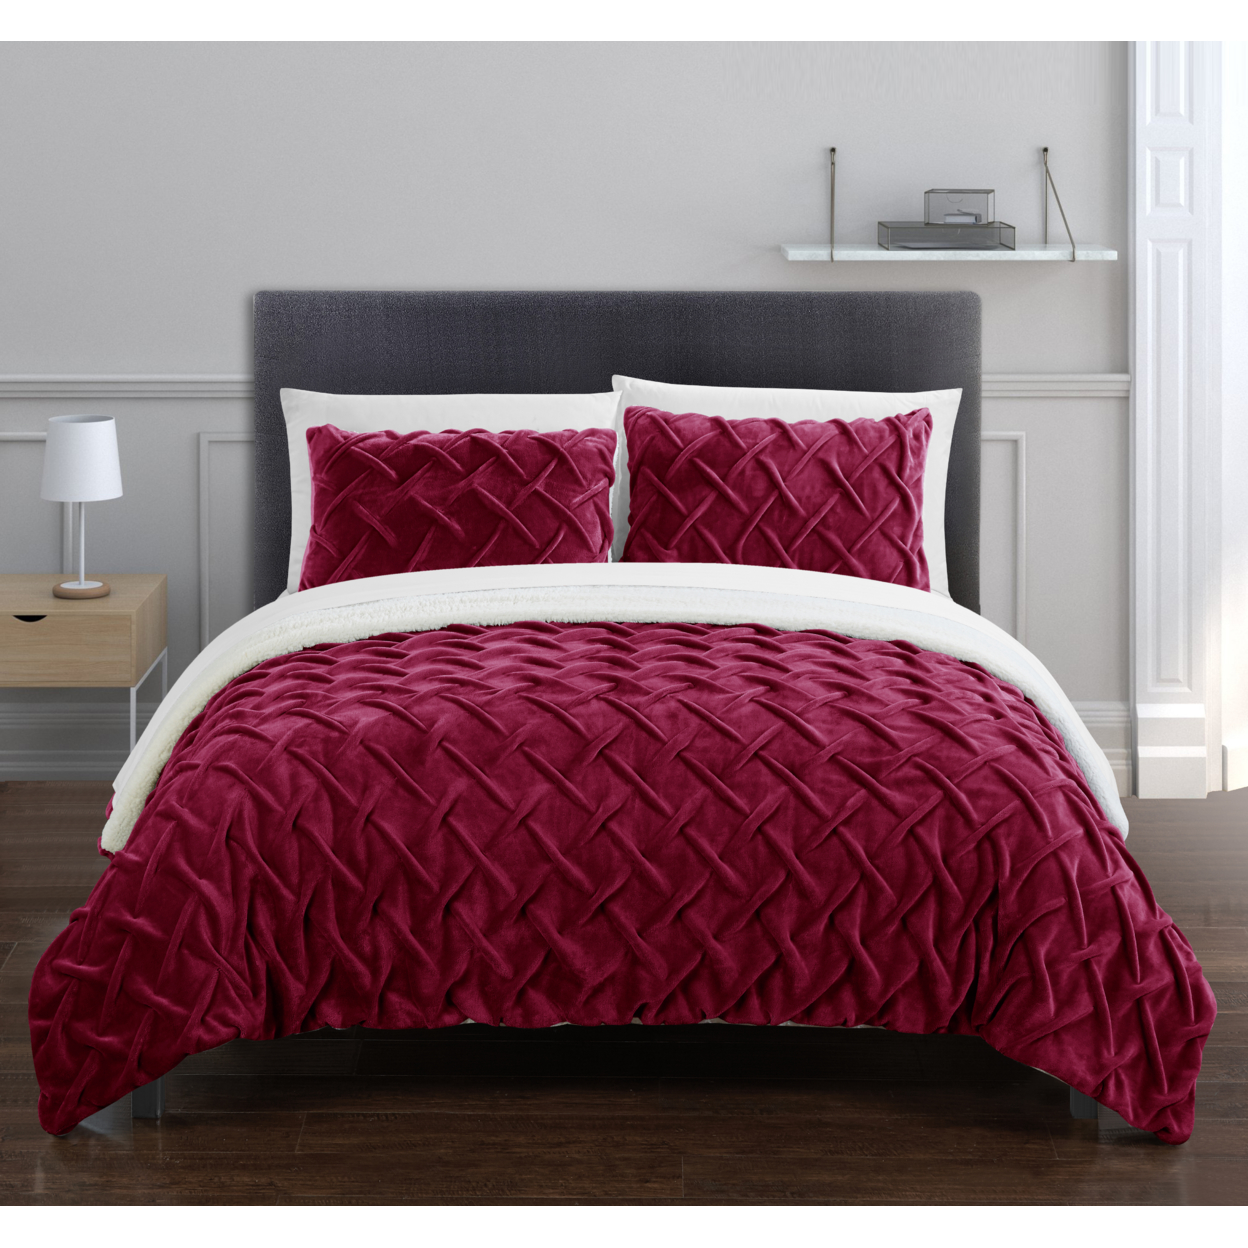 Thirsa 3 Or 2 Piece Comforter Set Ultra Plush Micro Mink Criss Cross Pinch Pleat Sherpa Lined Bedding - Red, Twin Xl